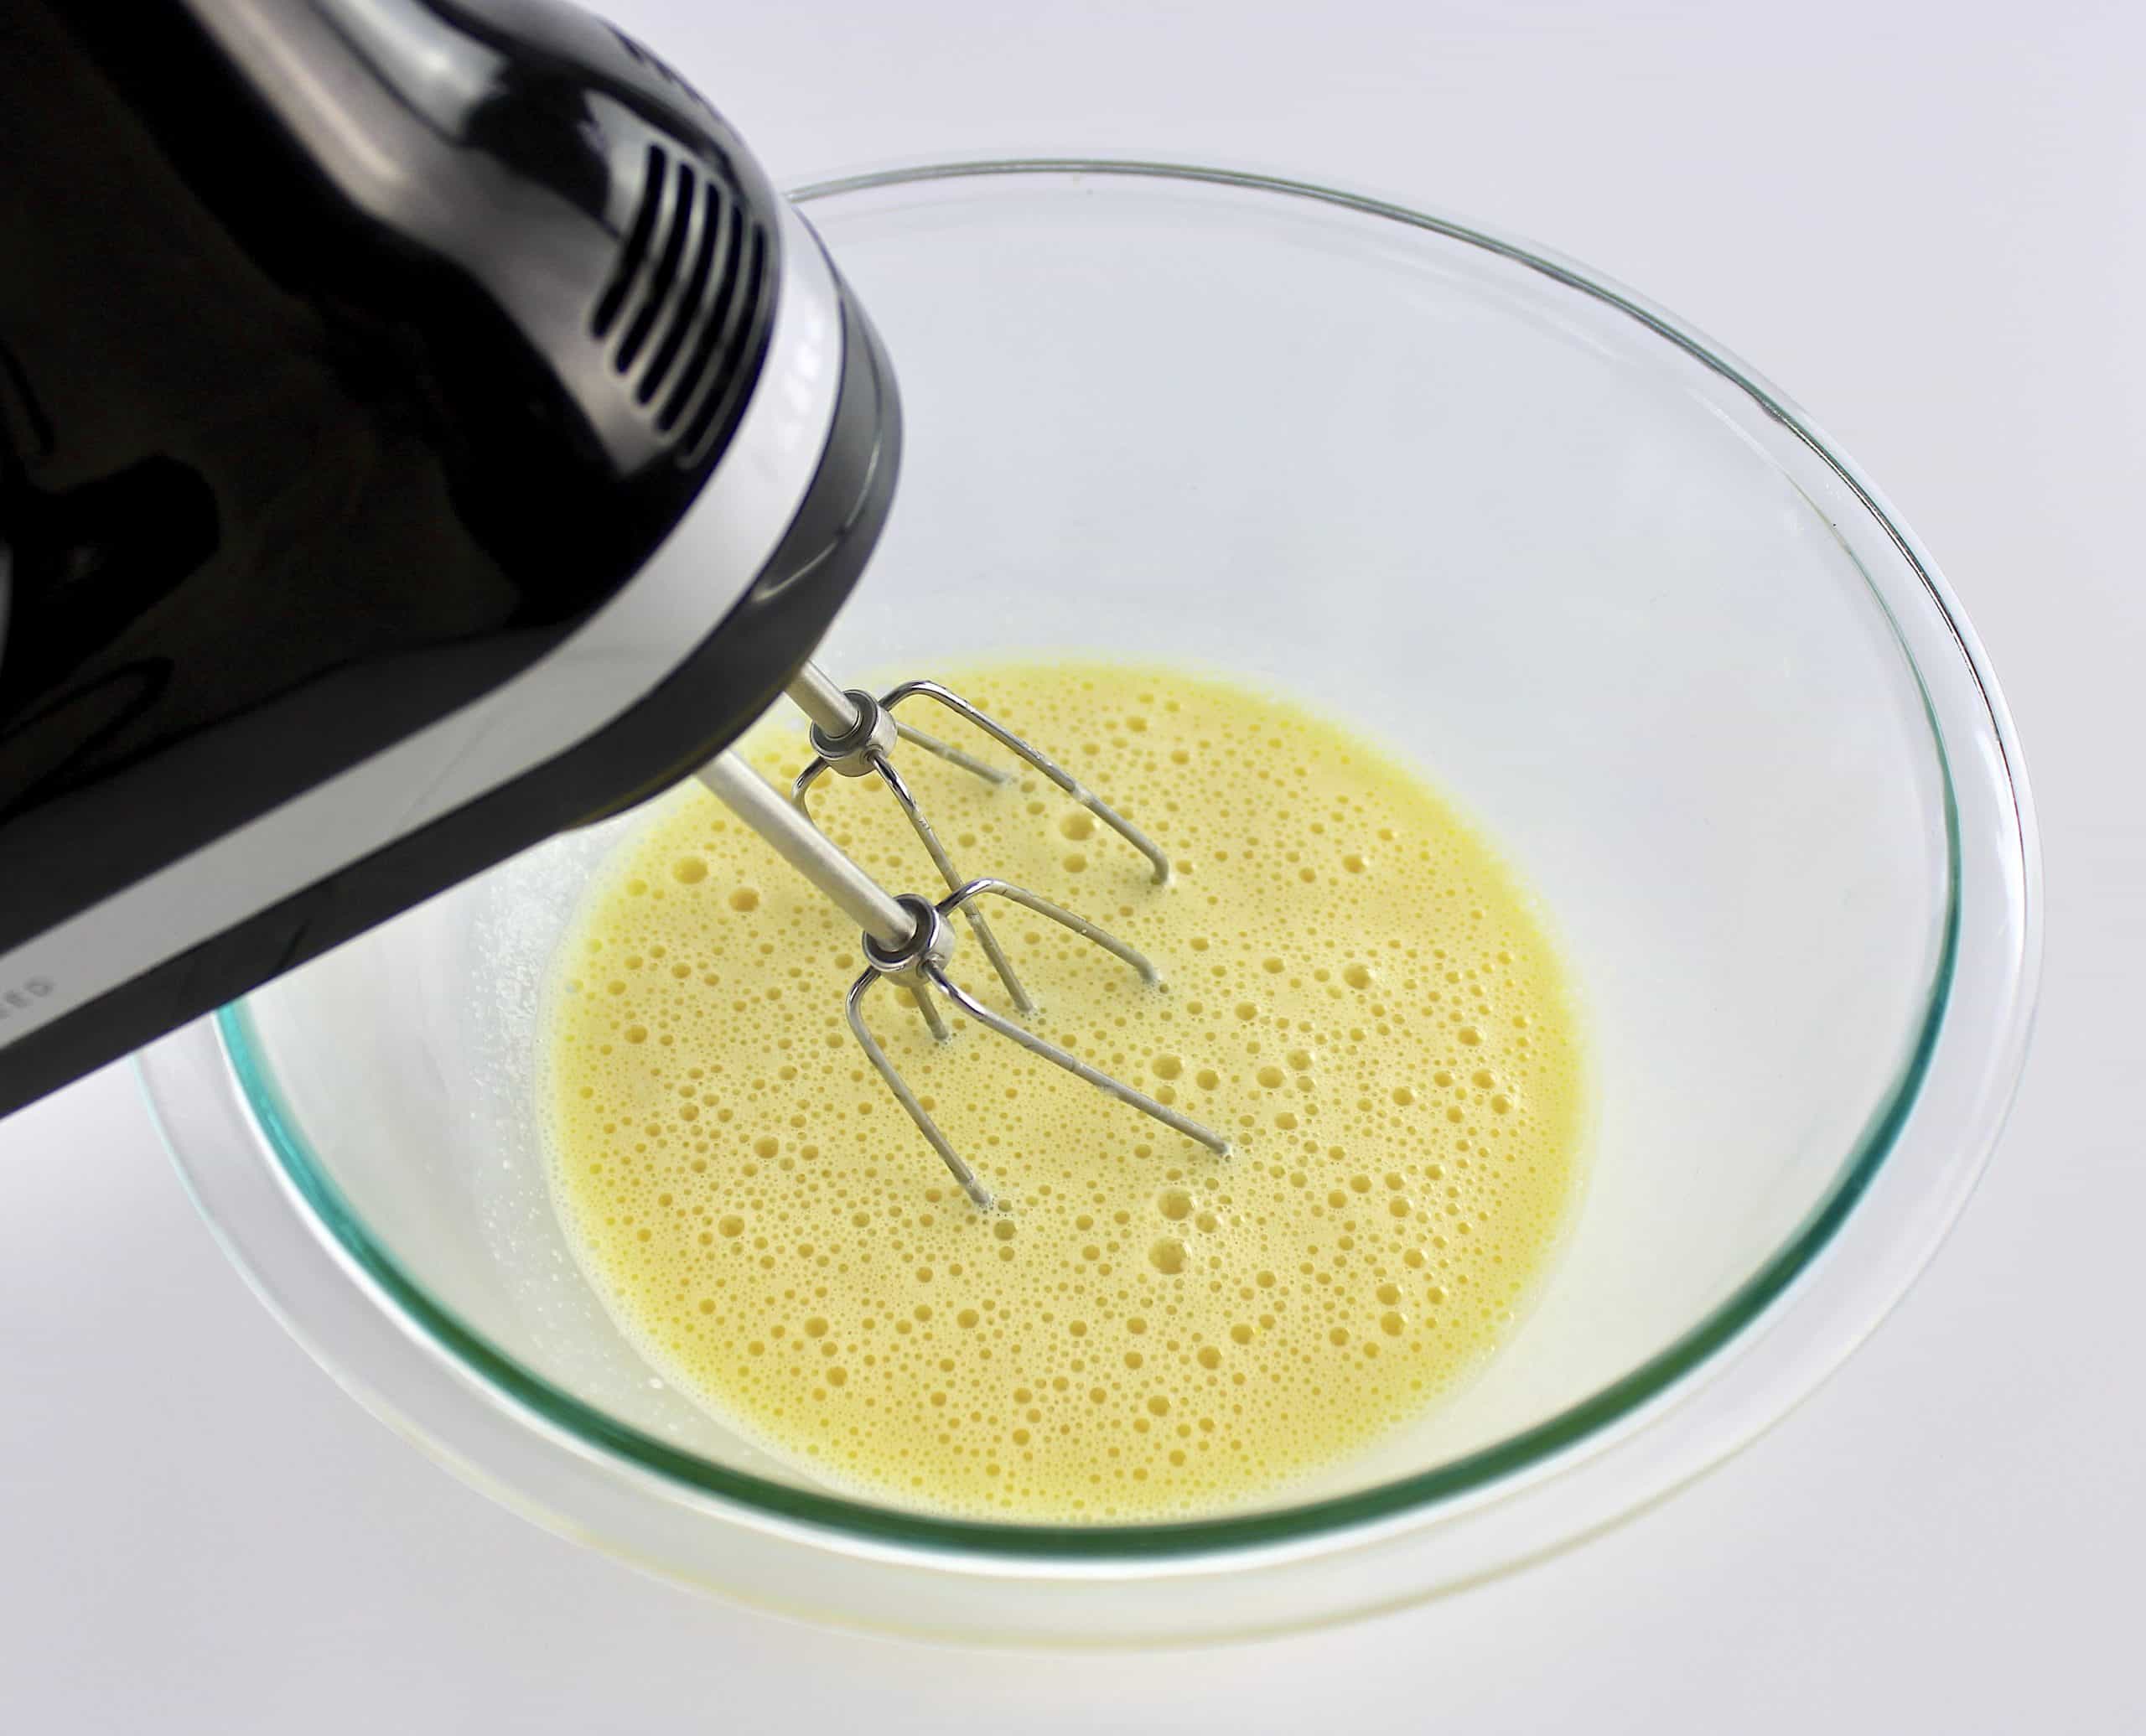 wet ingredients being whipped with hand mixer in glass bowl